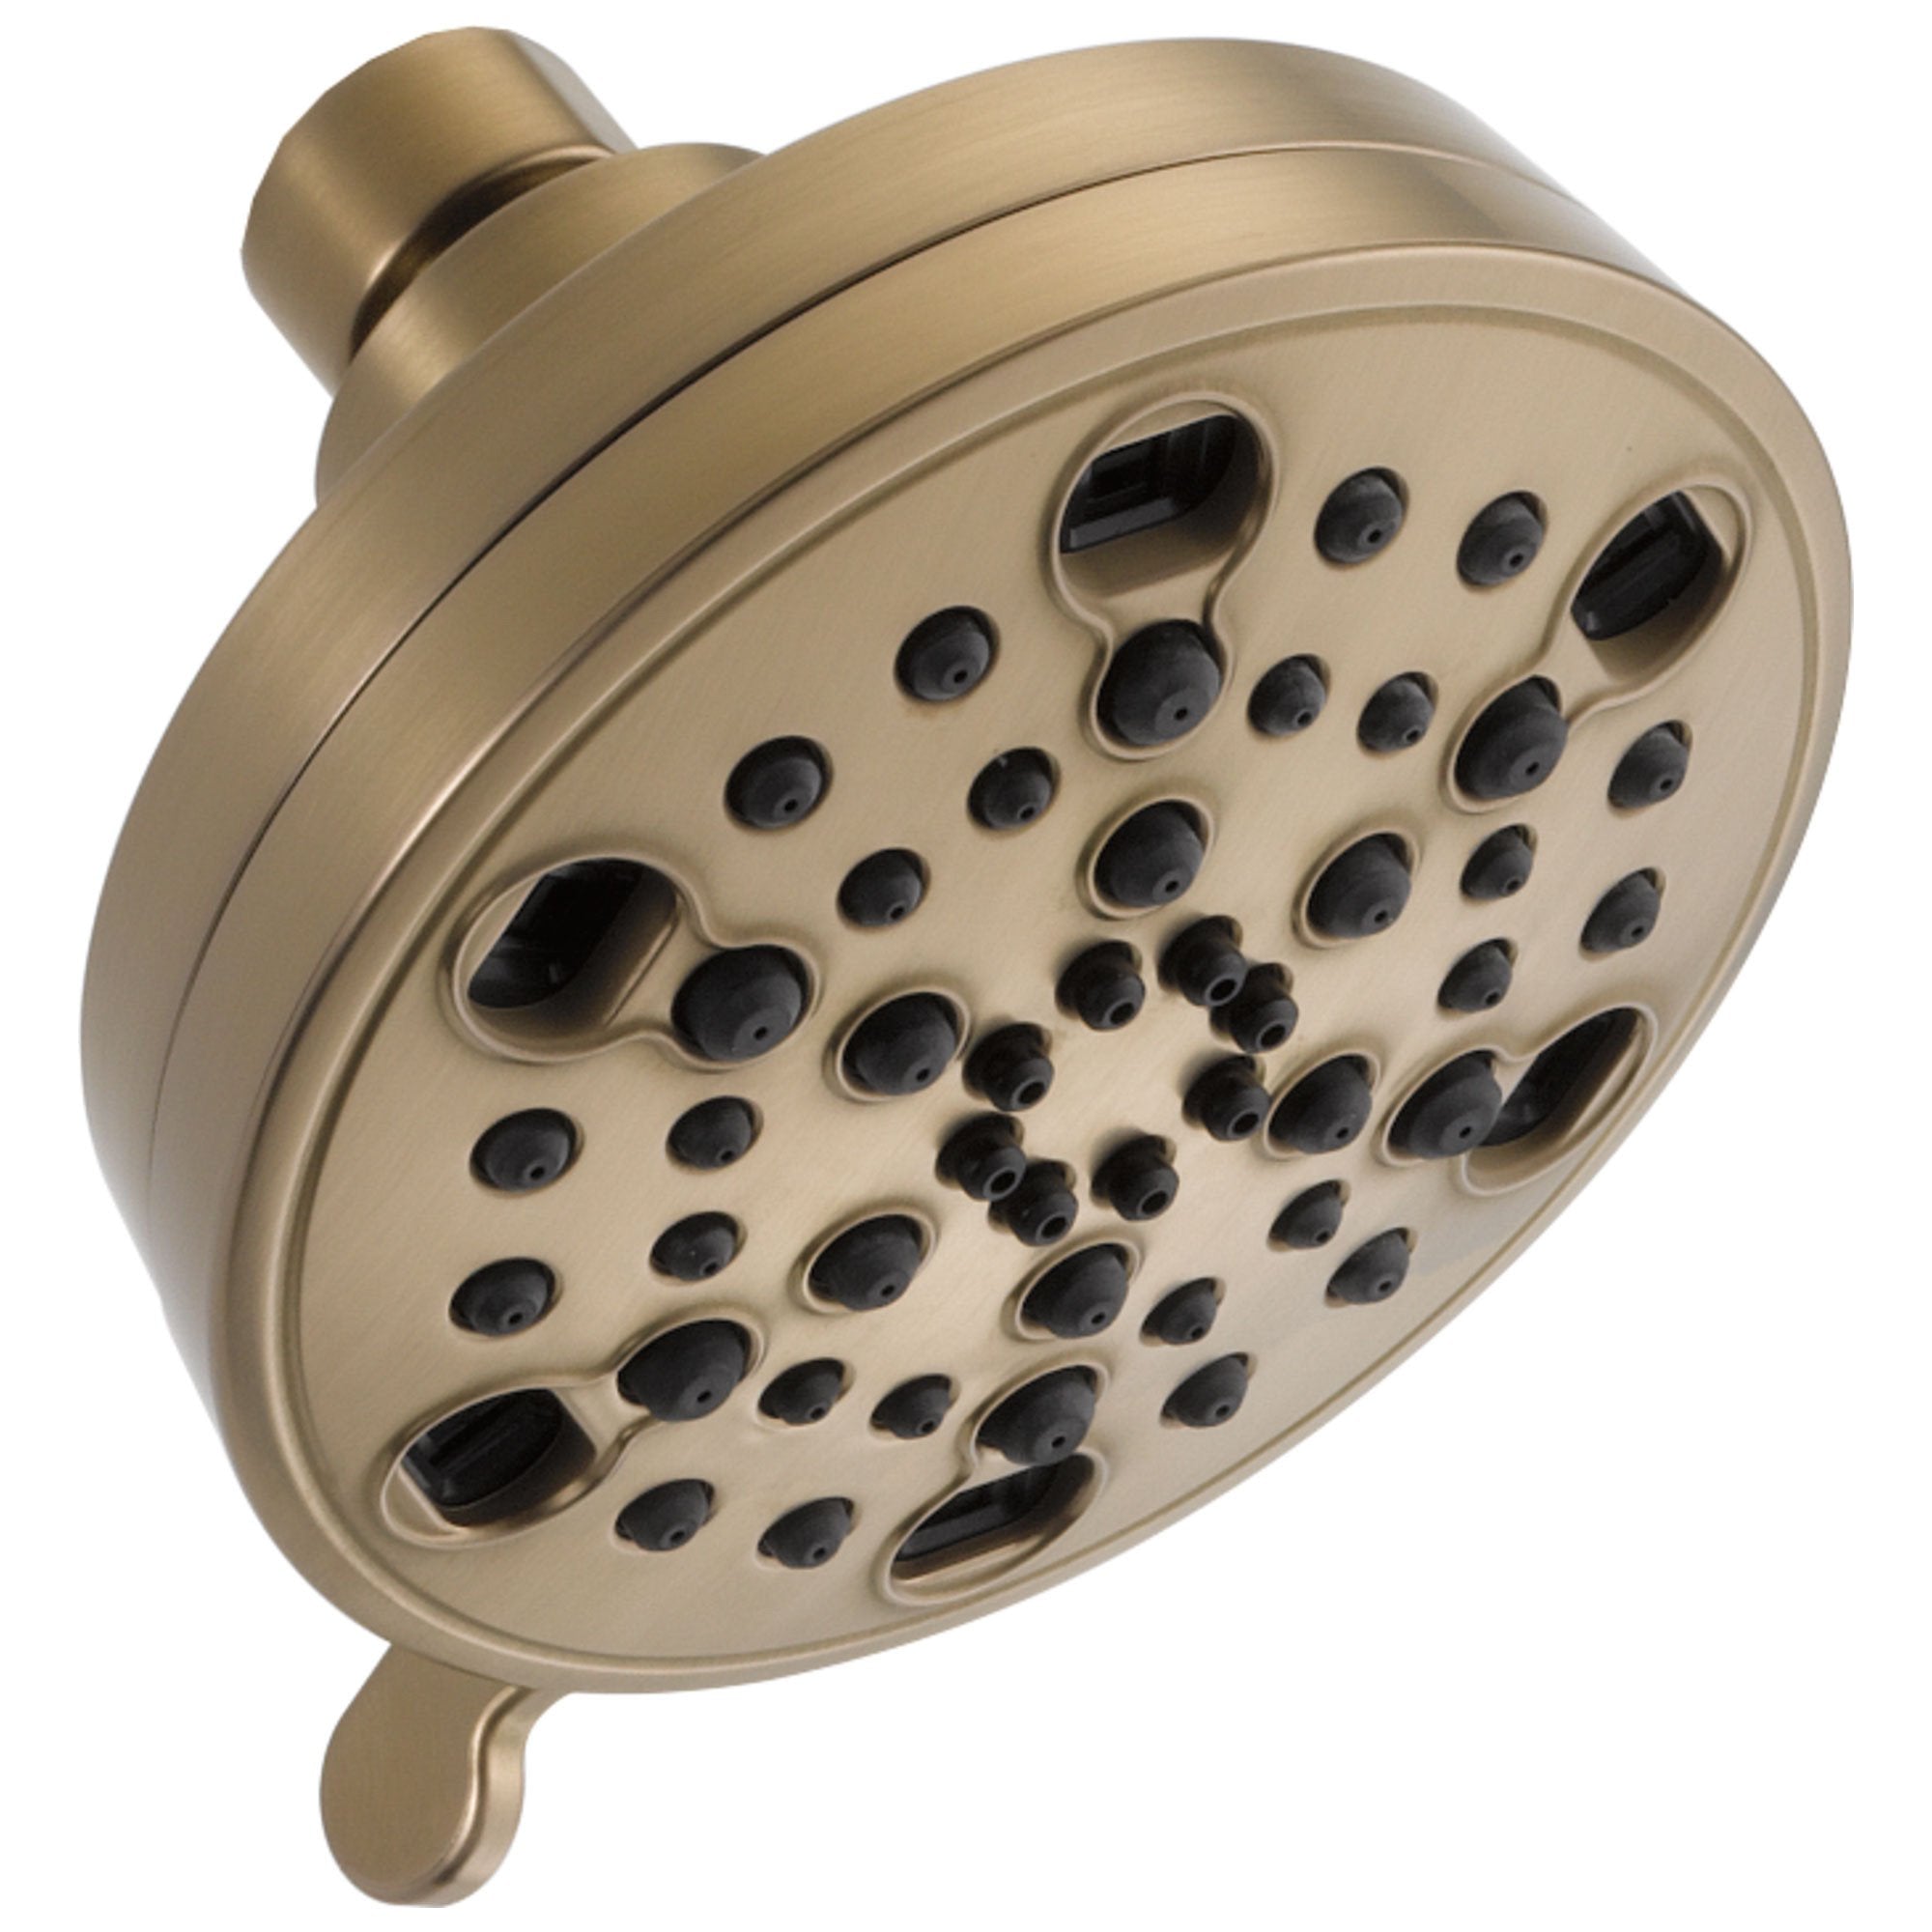 Delta Universal Showering Components Collection Champagne Bronze Finish H2Okinetic 5-Setting Contemporary Shower Head 729143